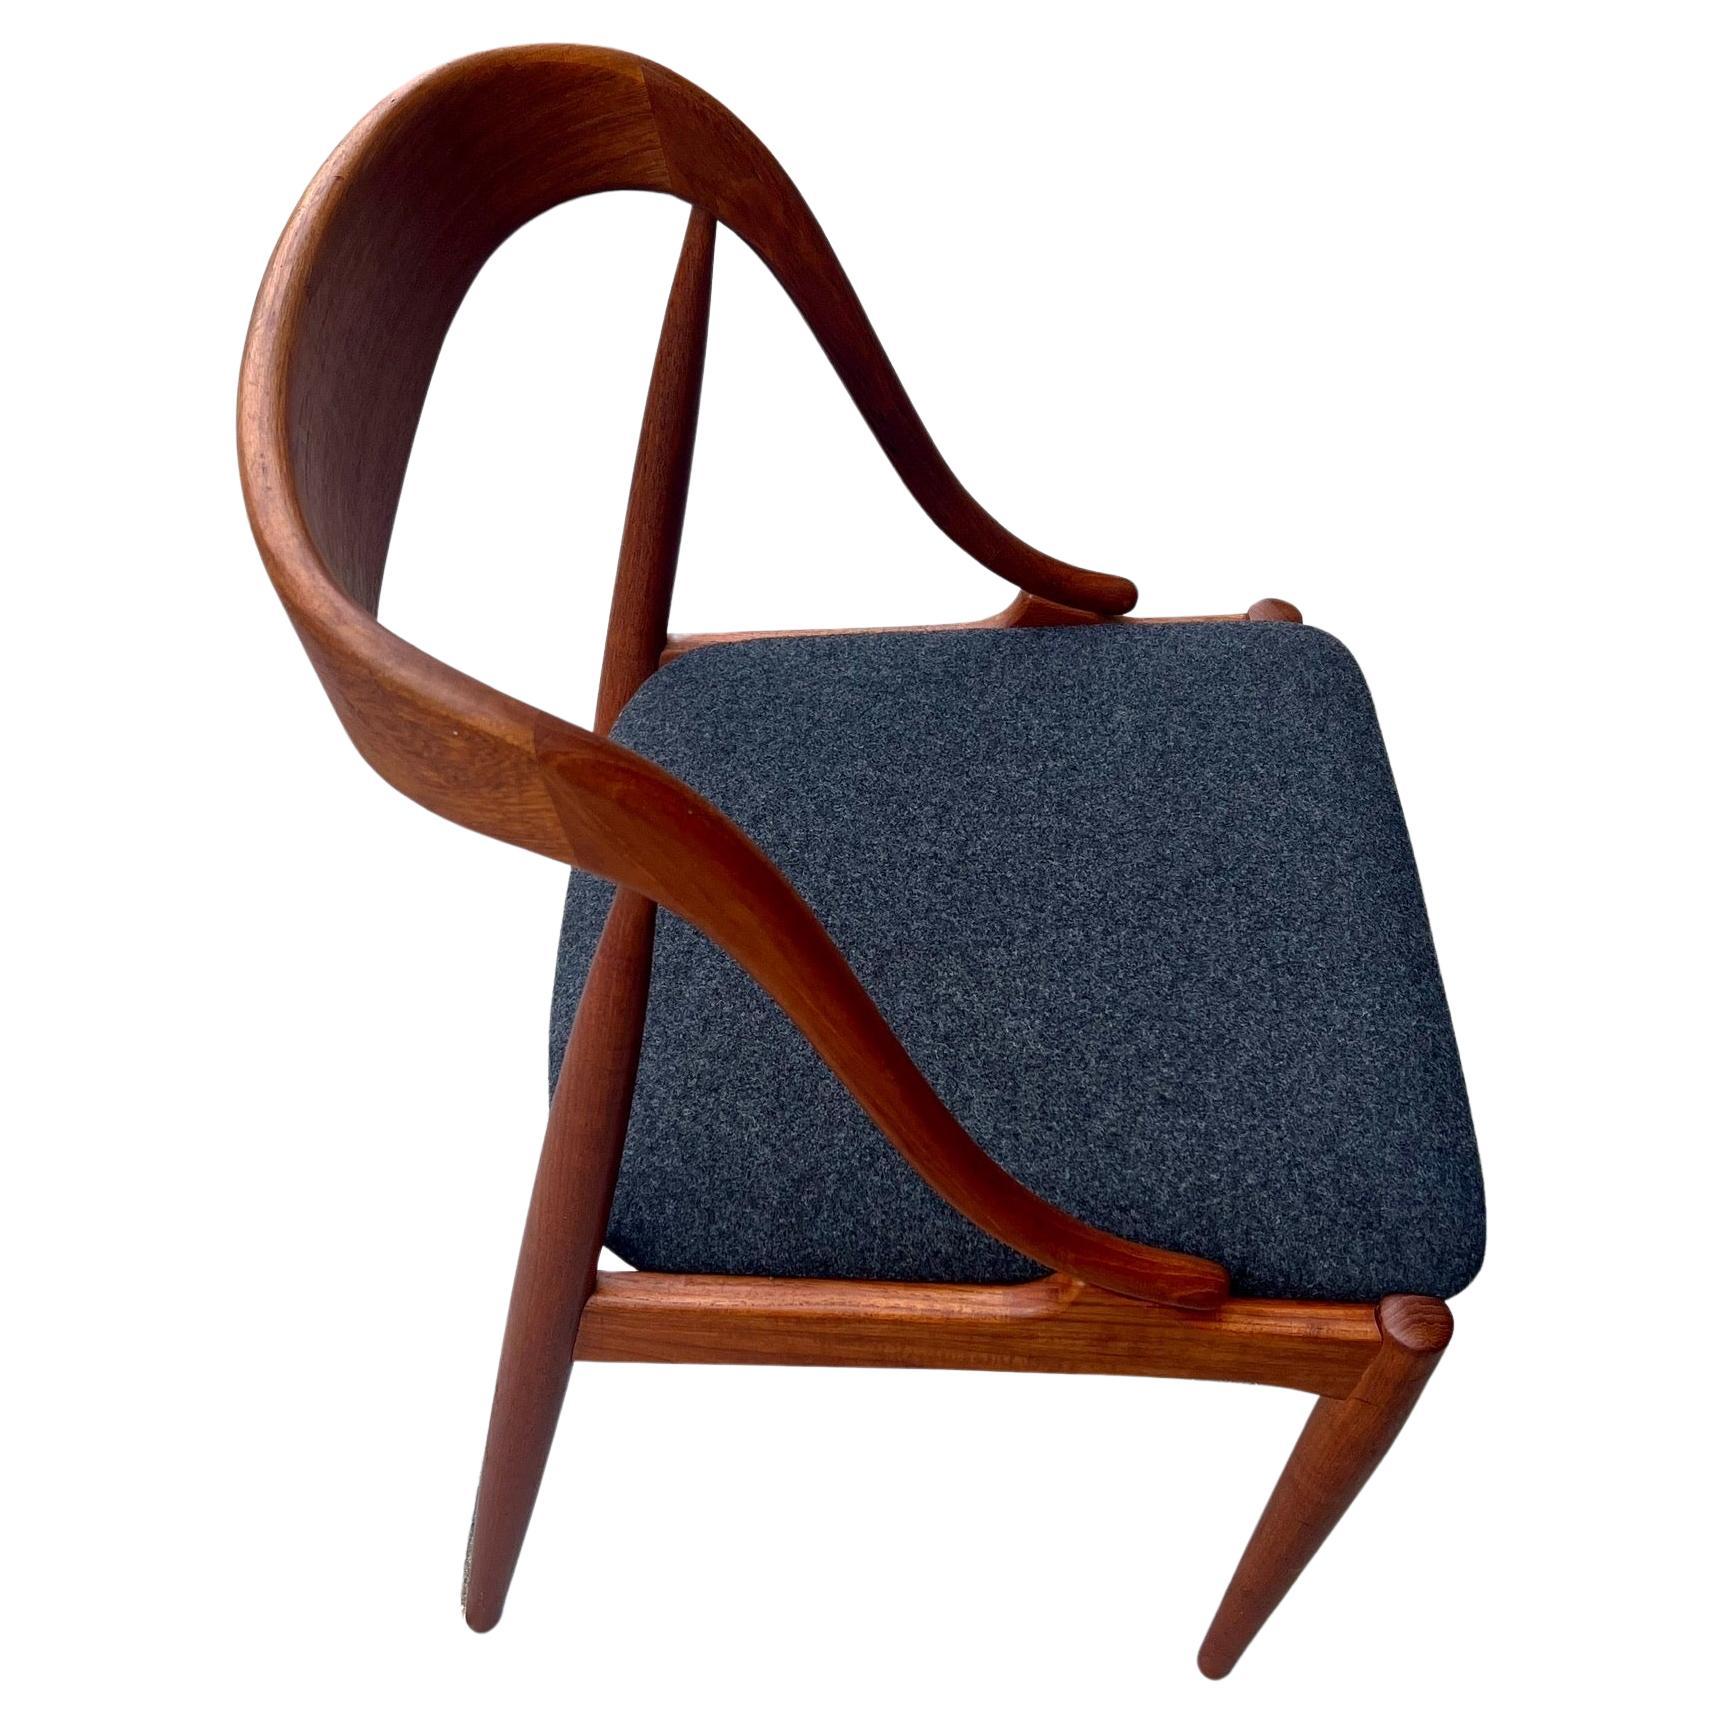 Danish Modern teak Model 16 Chair by Johannes Andersen for Uldum Mobler In Excellent Condition For Sale In San Diego, CA